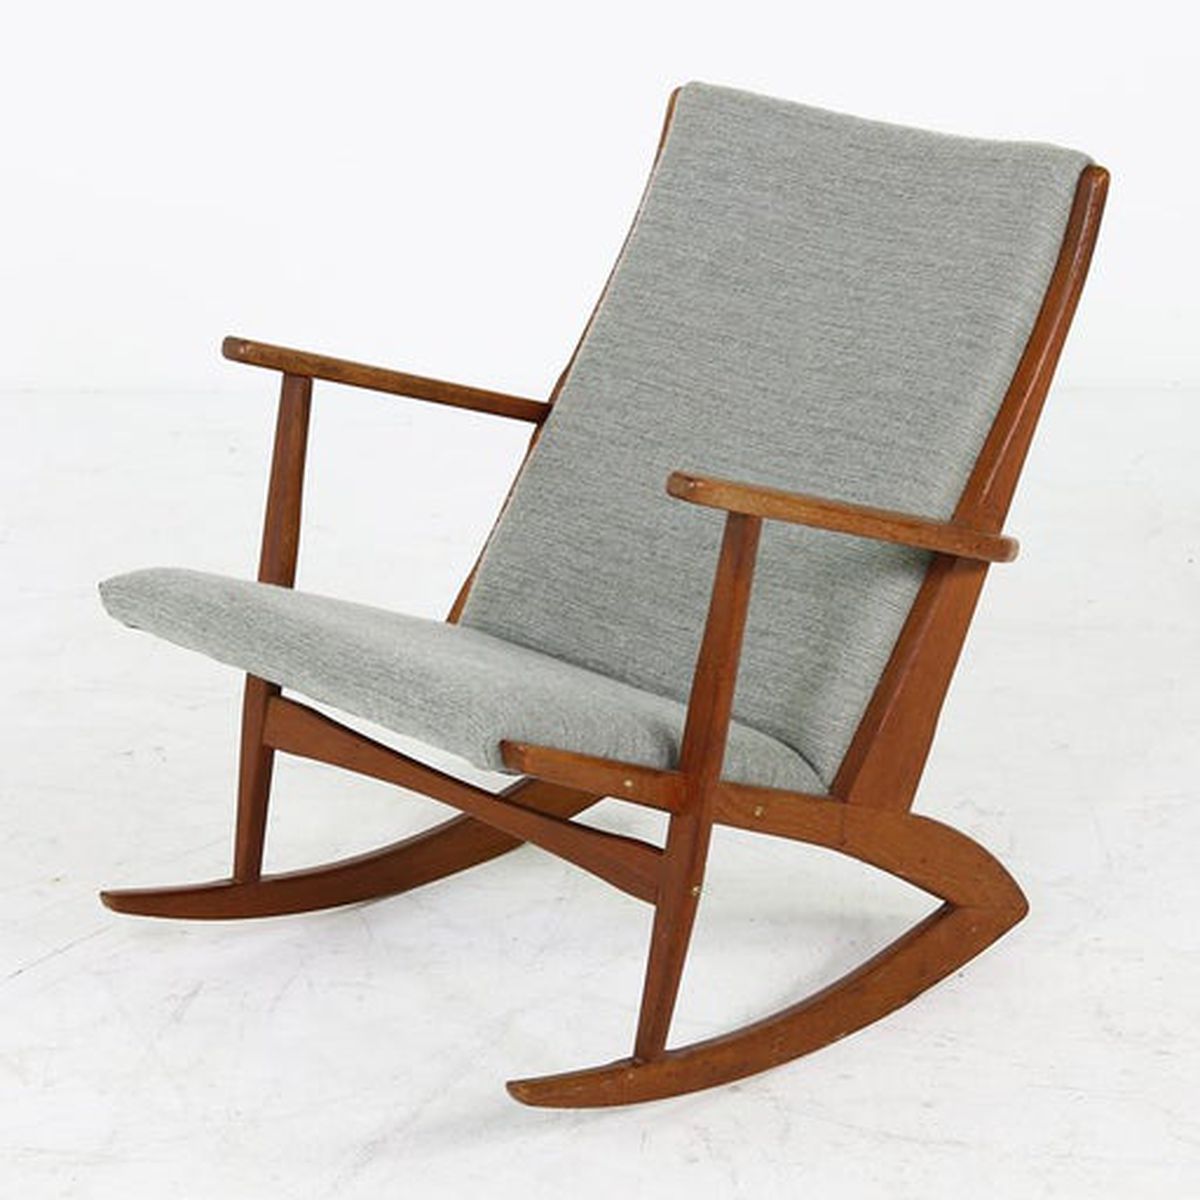 A rocking chair with wooden frame and light gray upholstery. 